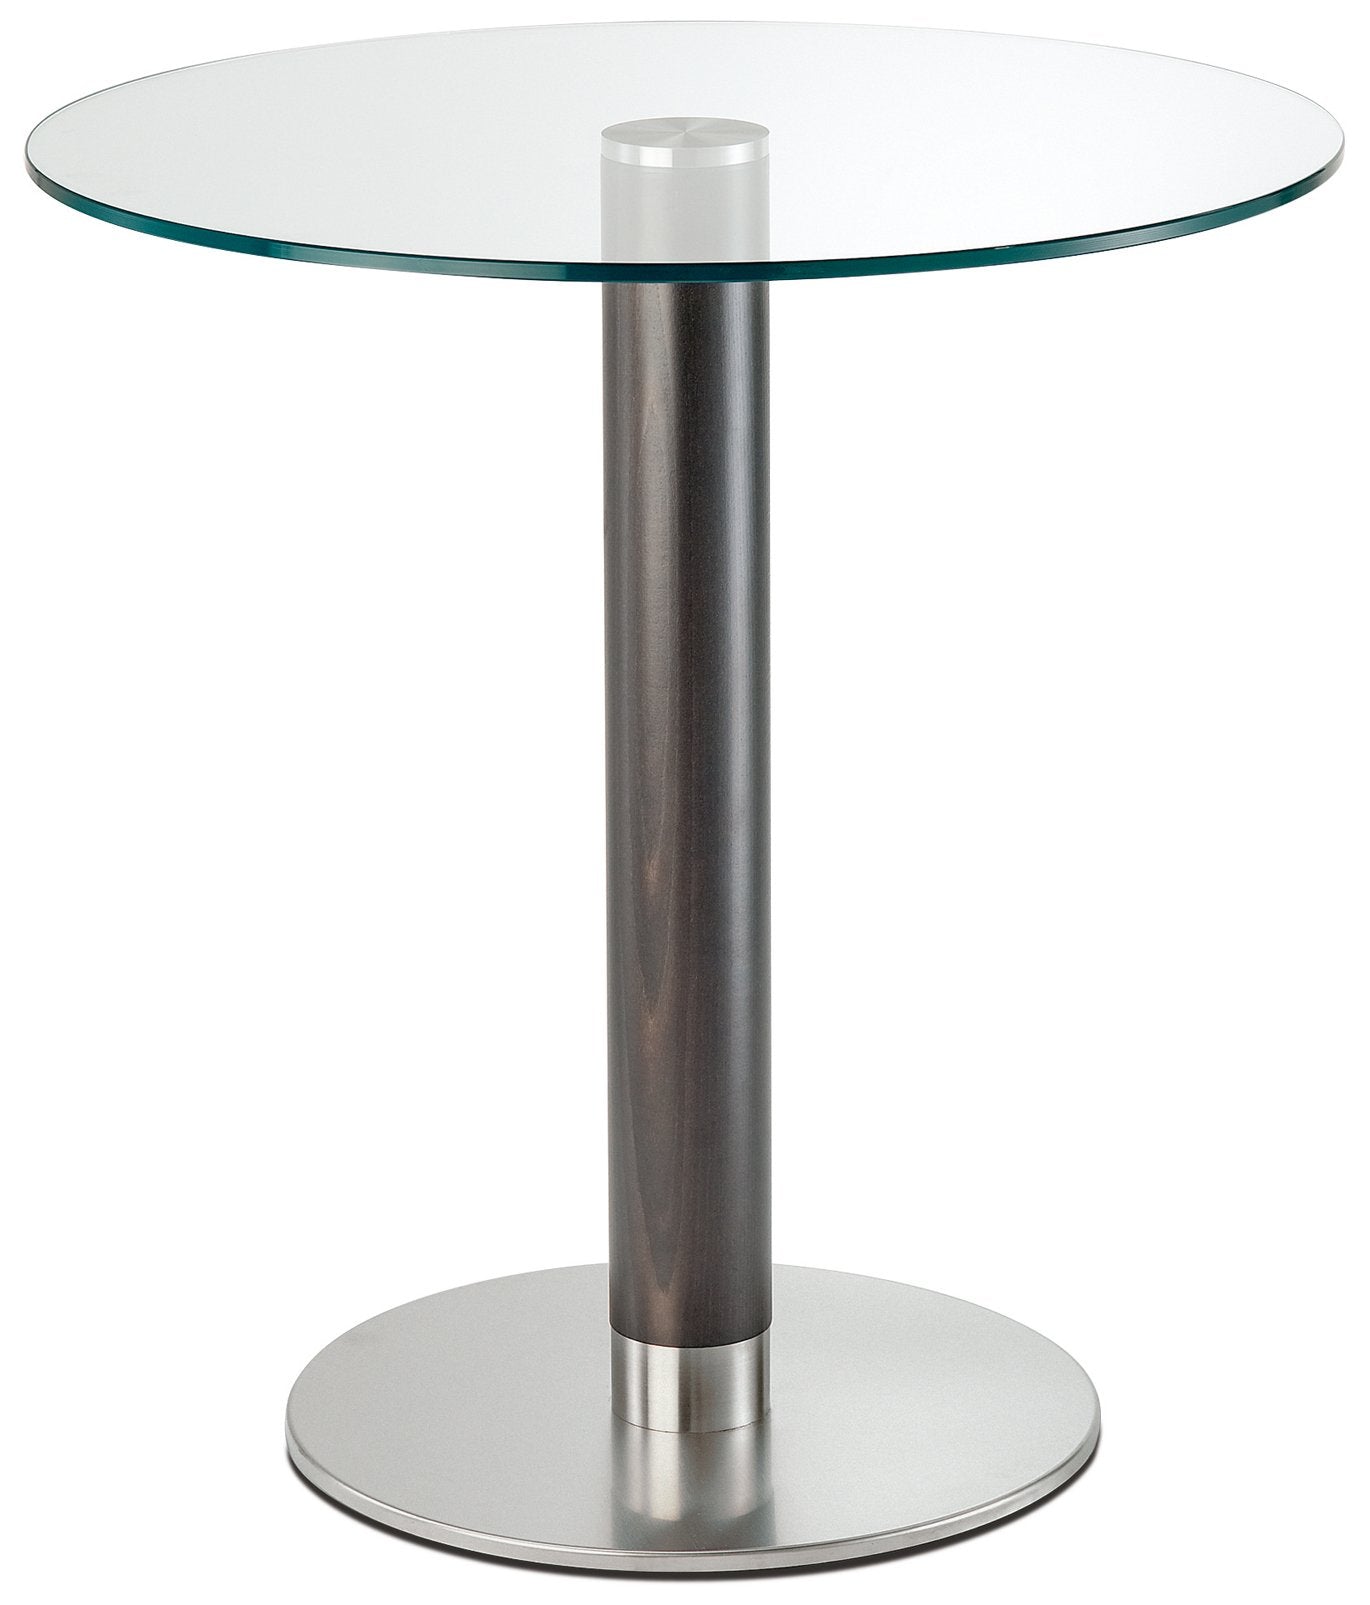 Inox 4411_FX Dining Round Base-Pedrali-Contract Furniture Store